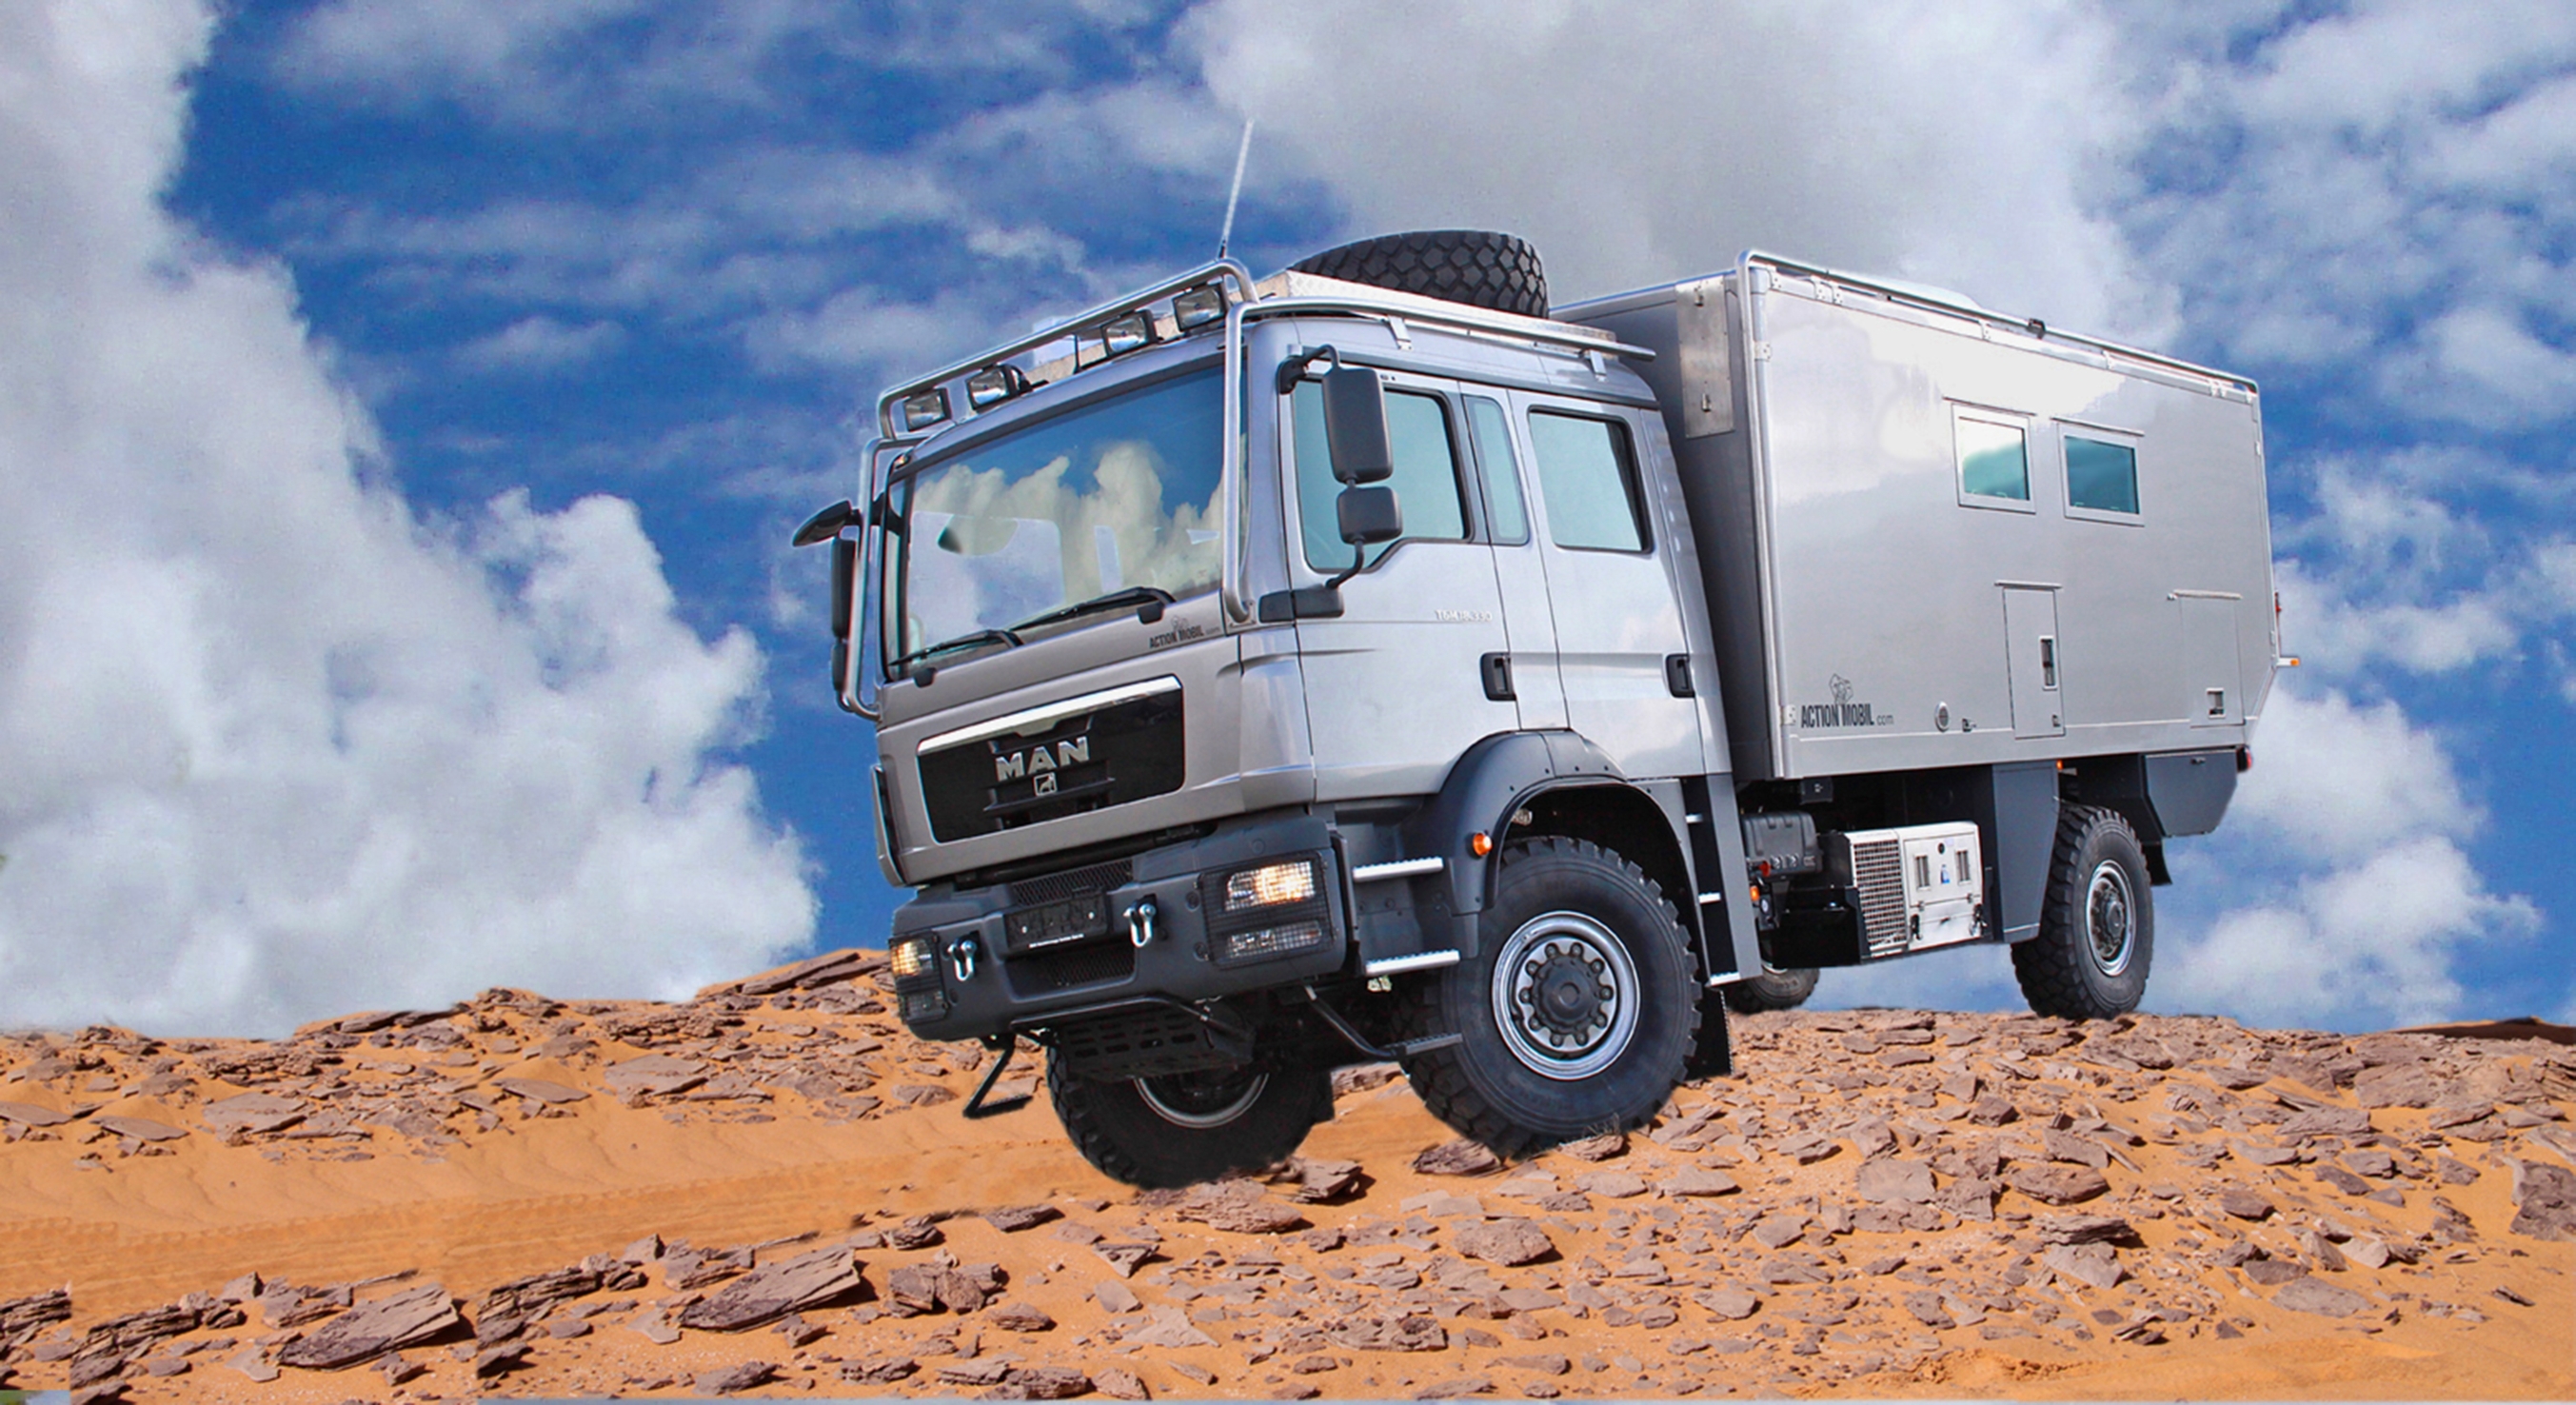 The Action Mobil Atacama 7900 Expedition Vehicle with Built-in Garage is All You Need In Case of Armageddon